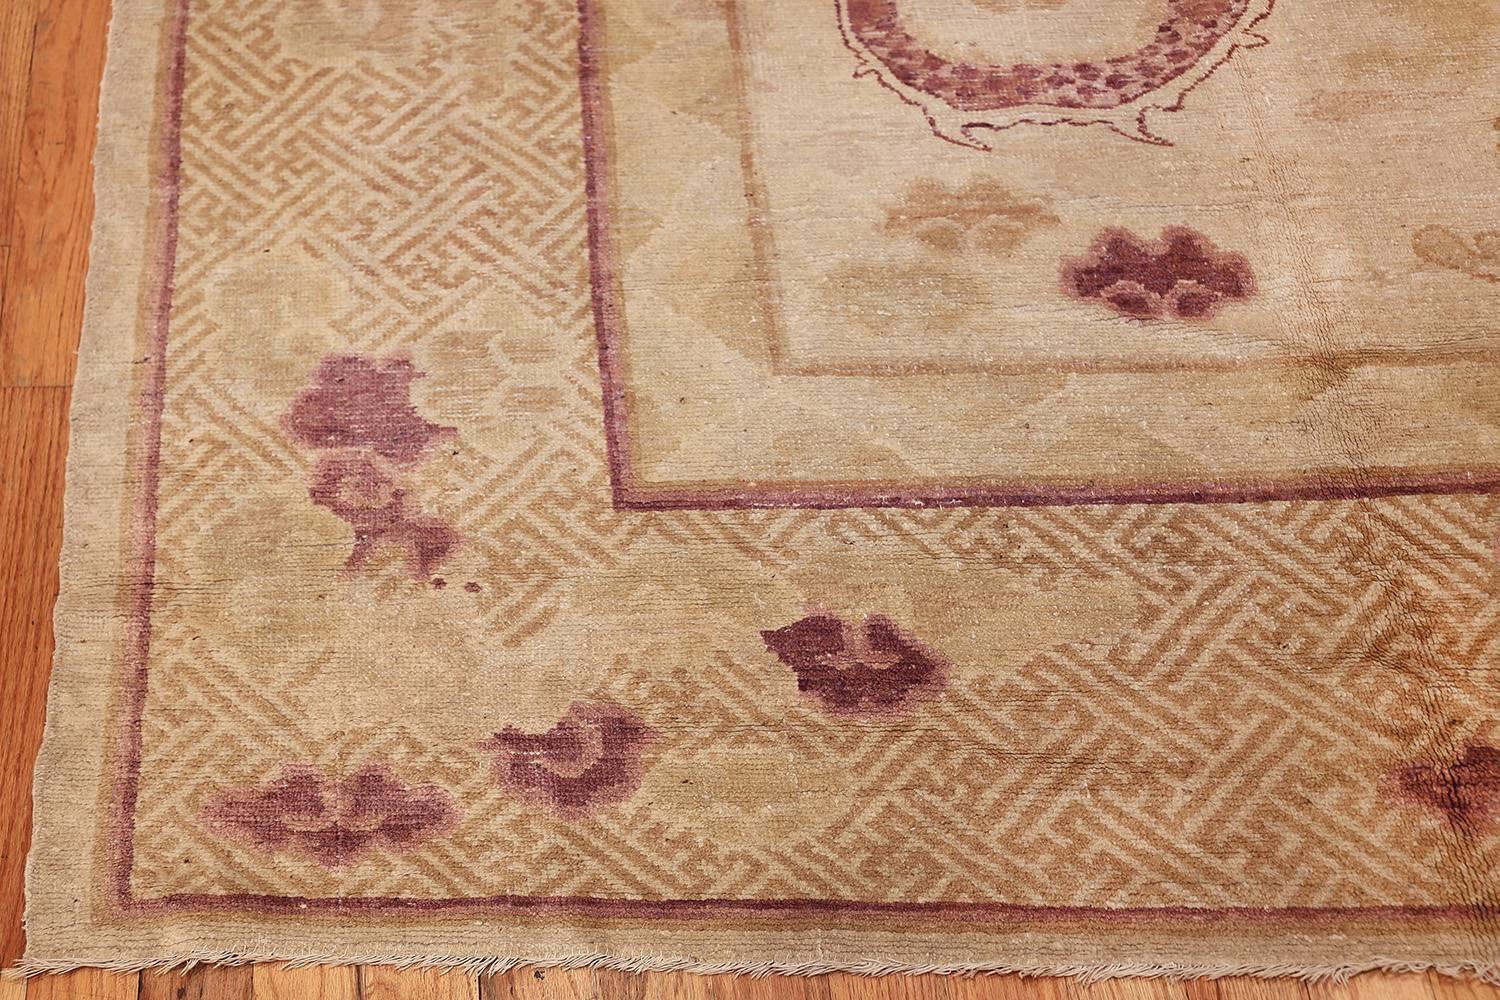 chinese rugs with dragon design